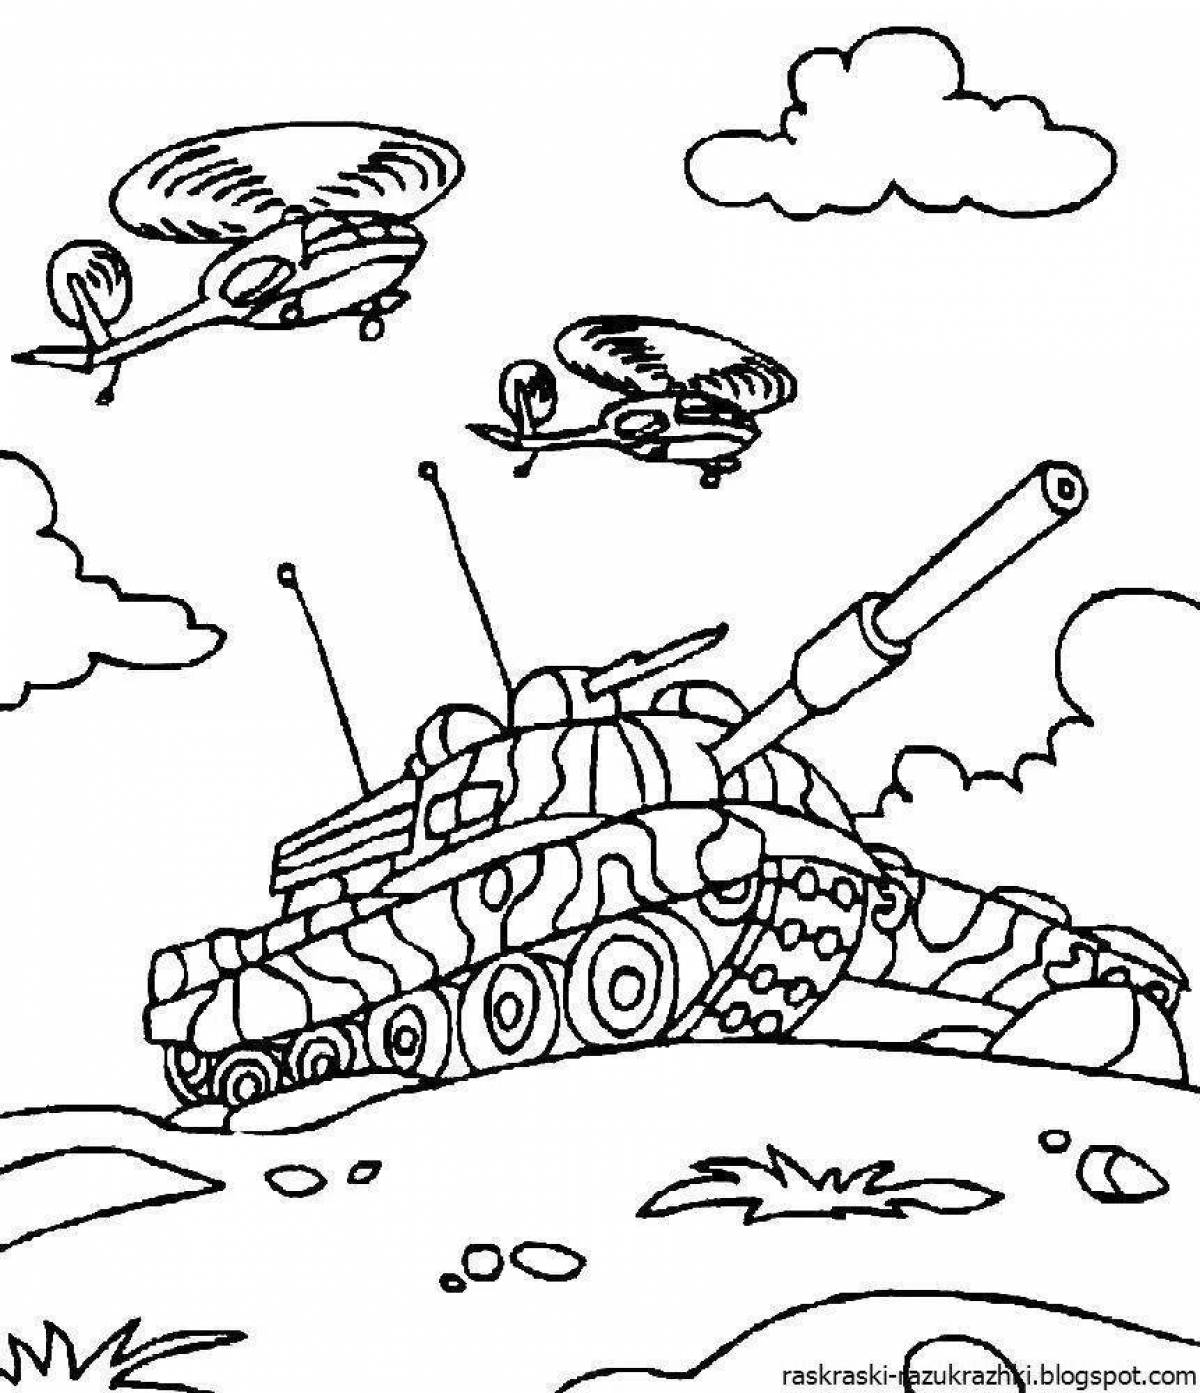 On a military theme for children to school #10